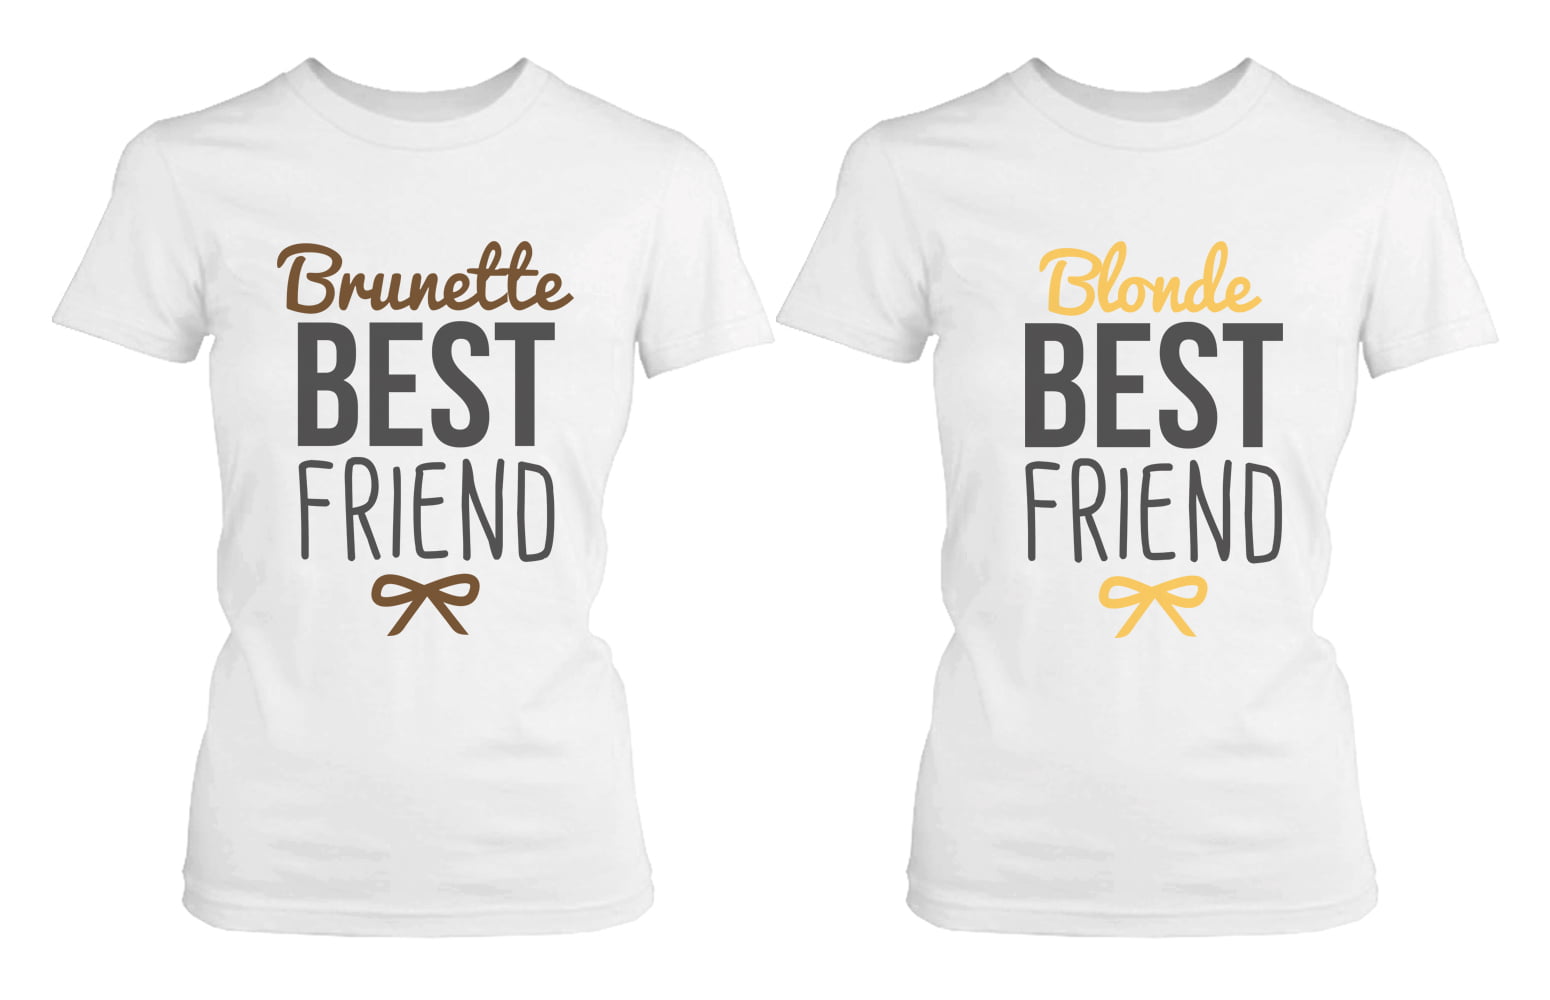 Details about   Best Friend Blonde and Brunette Best Friends Matching BFF White Shirts 